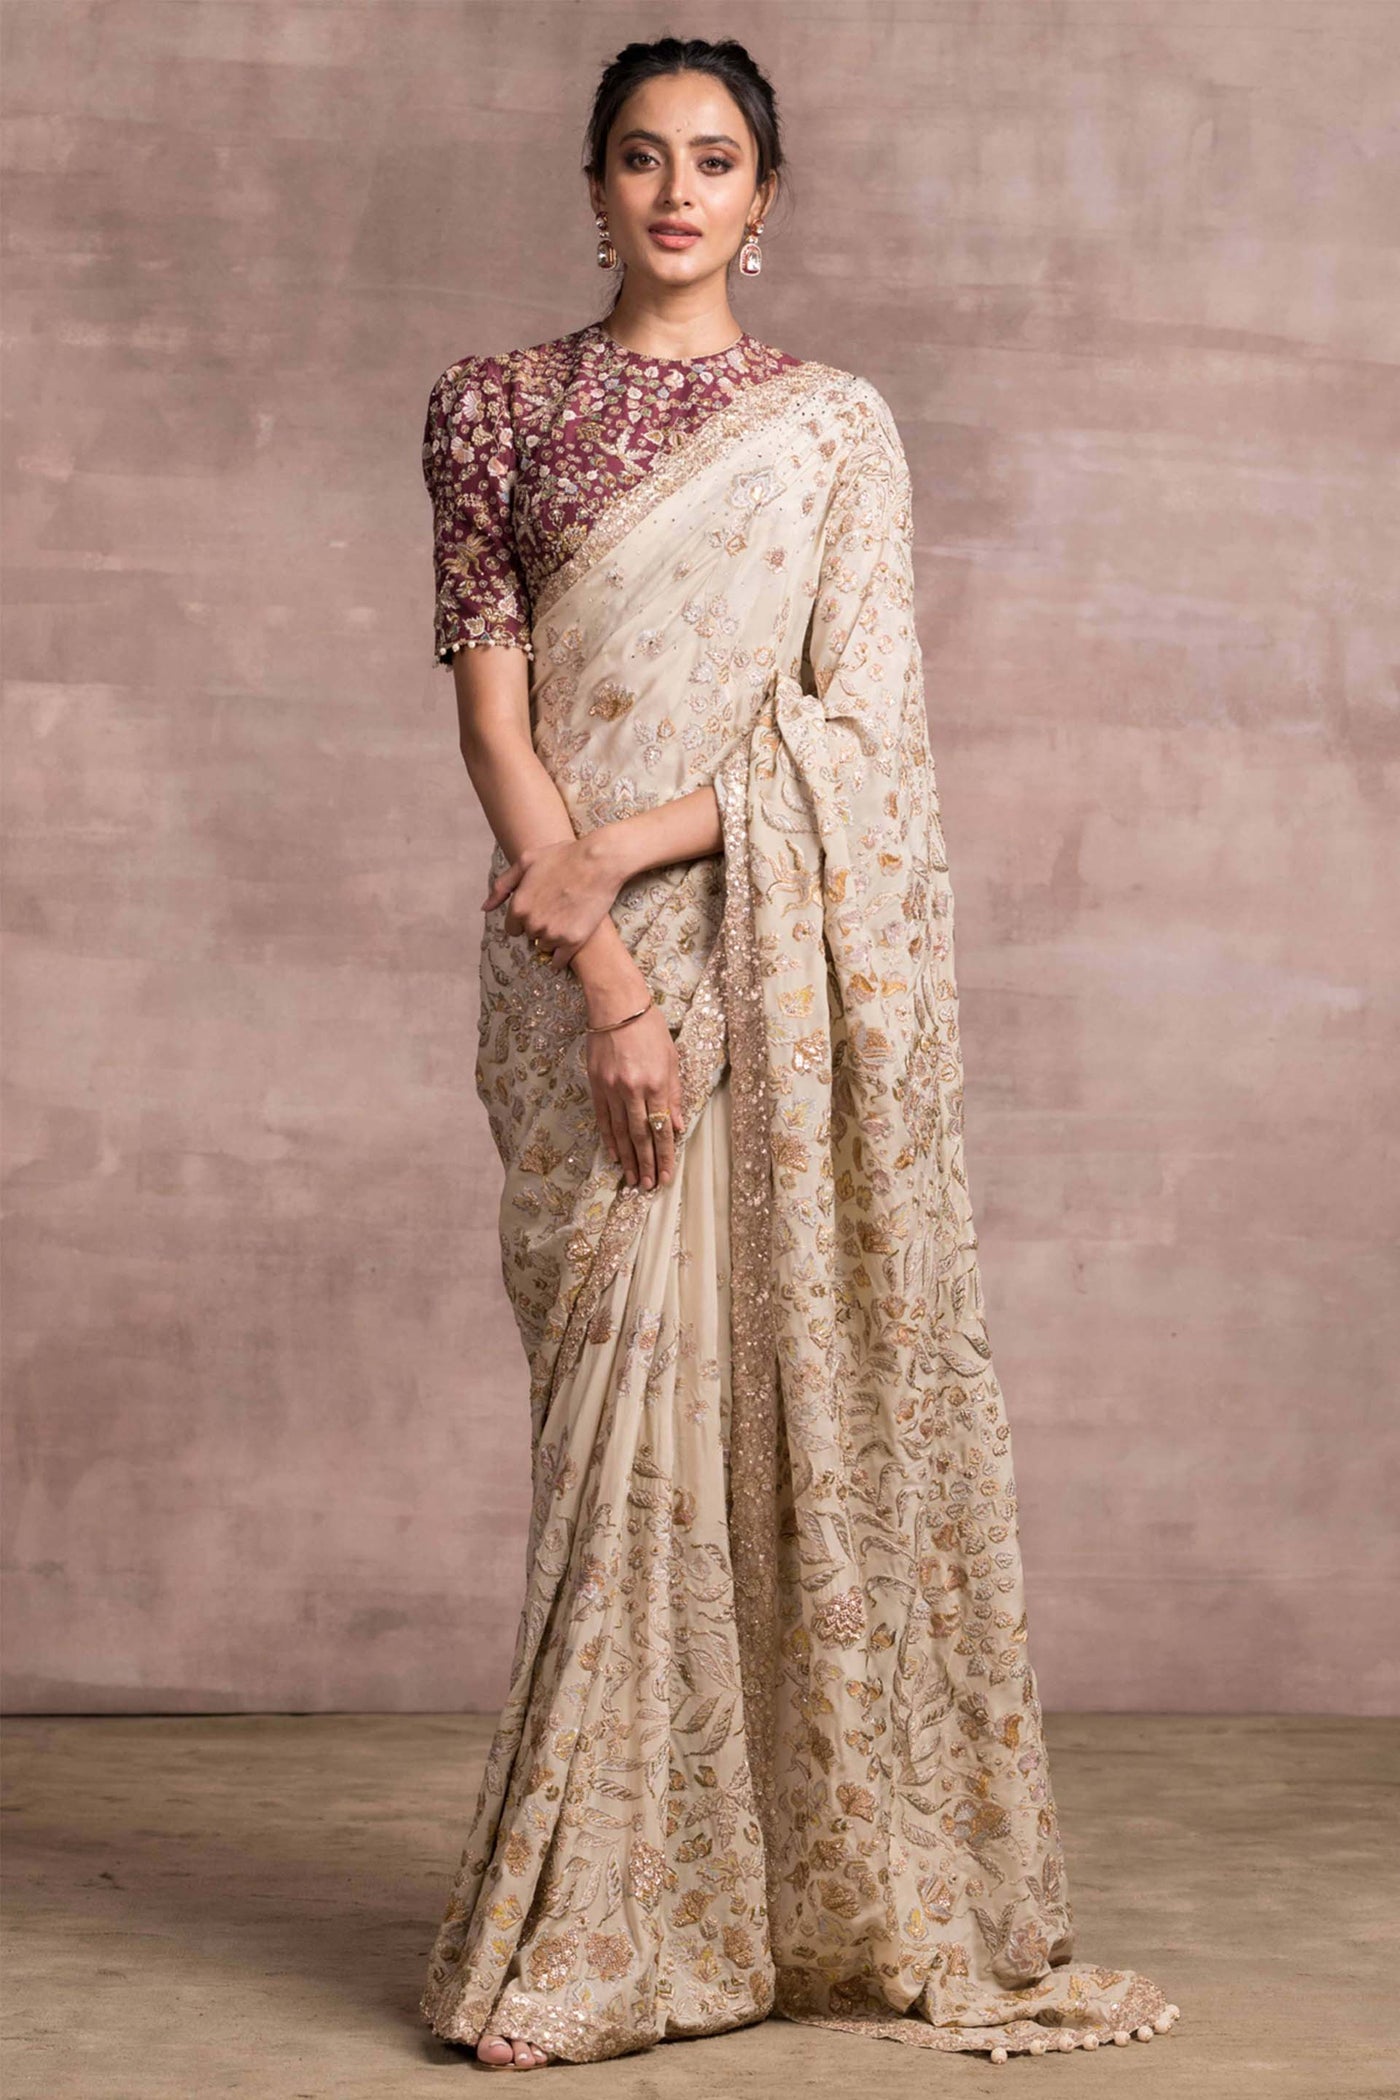 Tarun Tahiliani Embroidered Printed Saree In Silk Crepe With Contrasting Embroidered Blouse ivory bridal indian wedding designer wear online shopping melange singapore